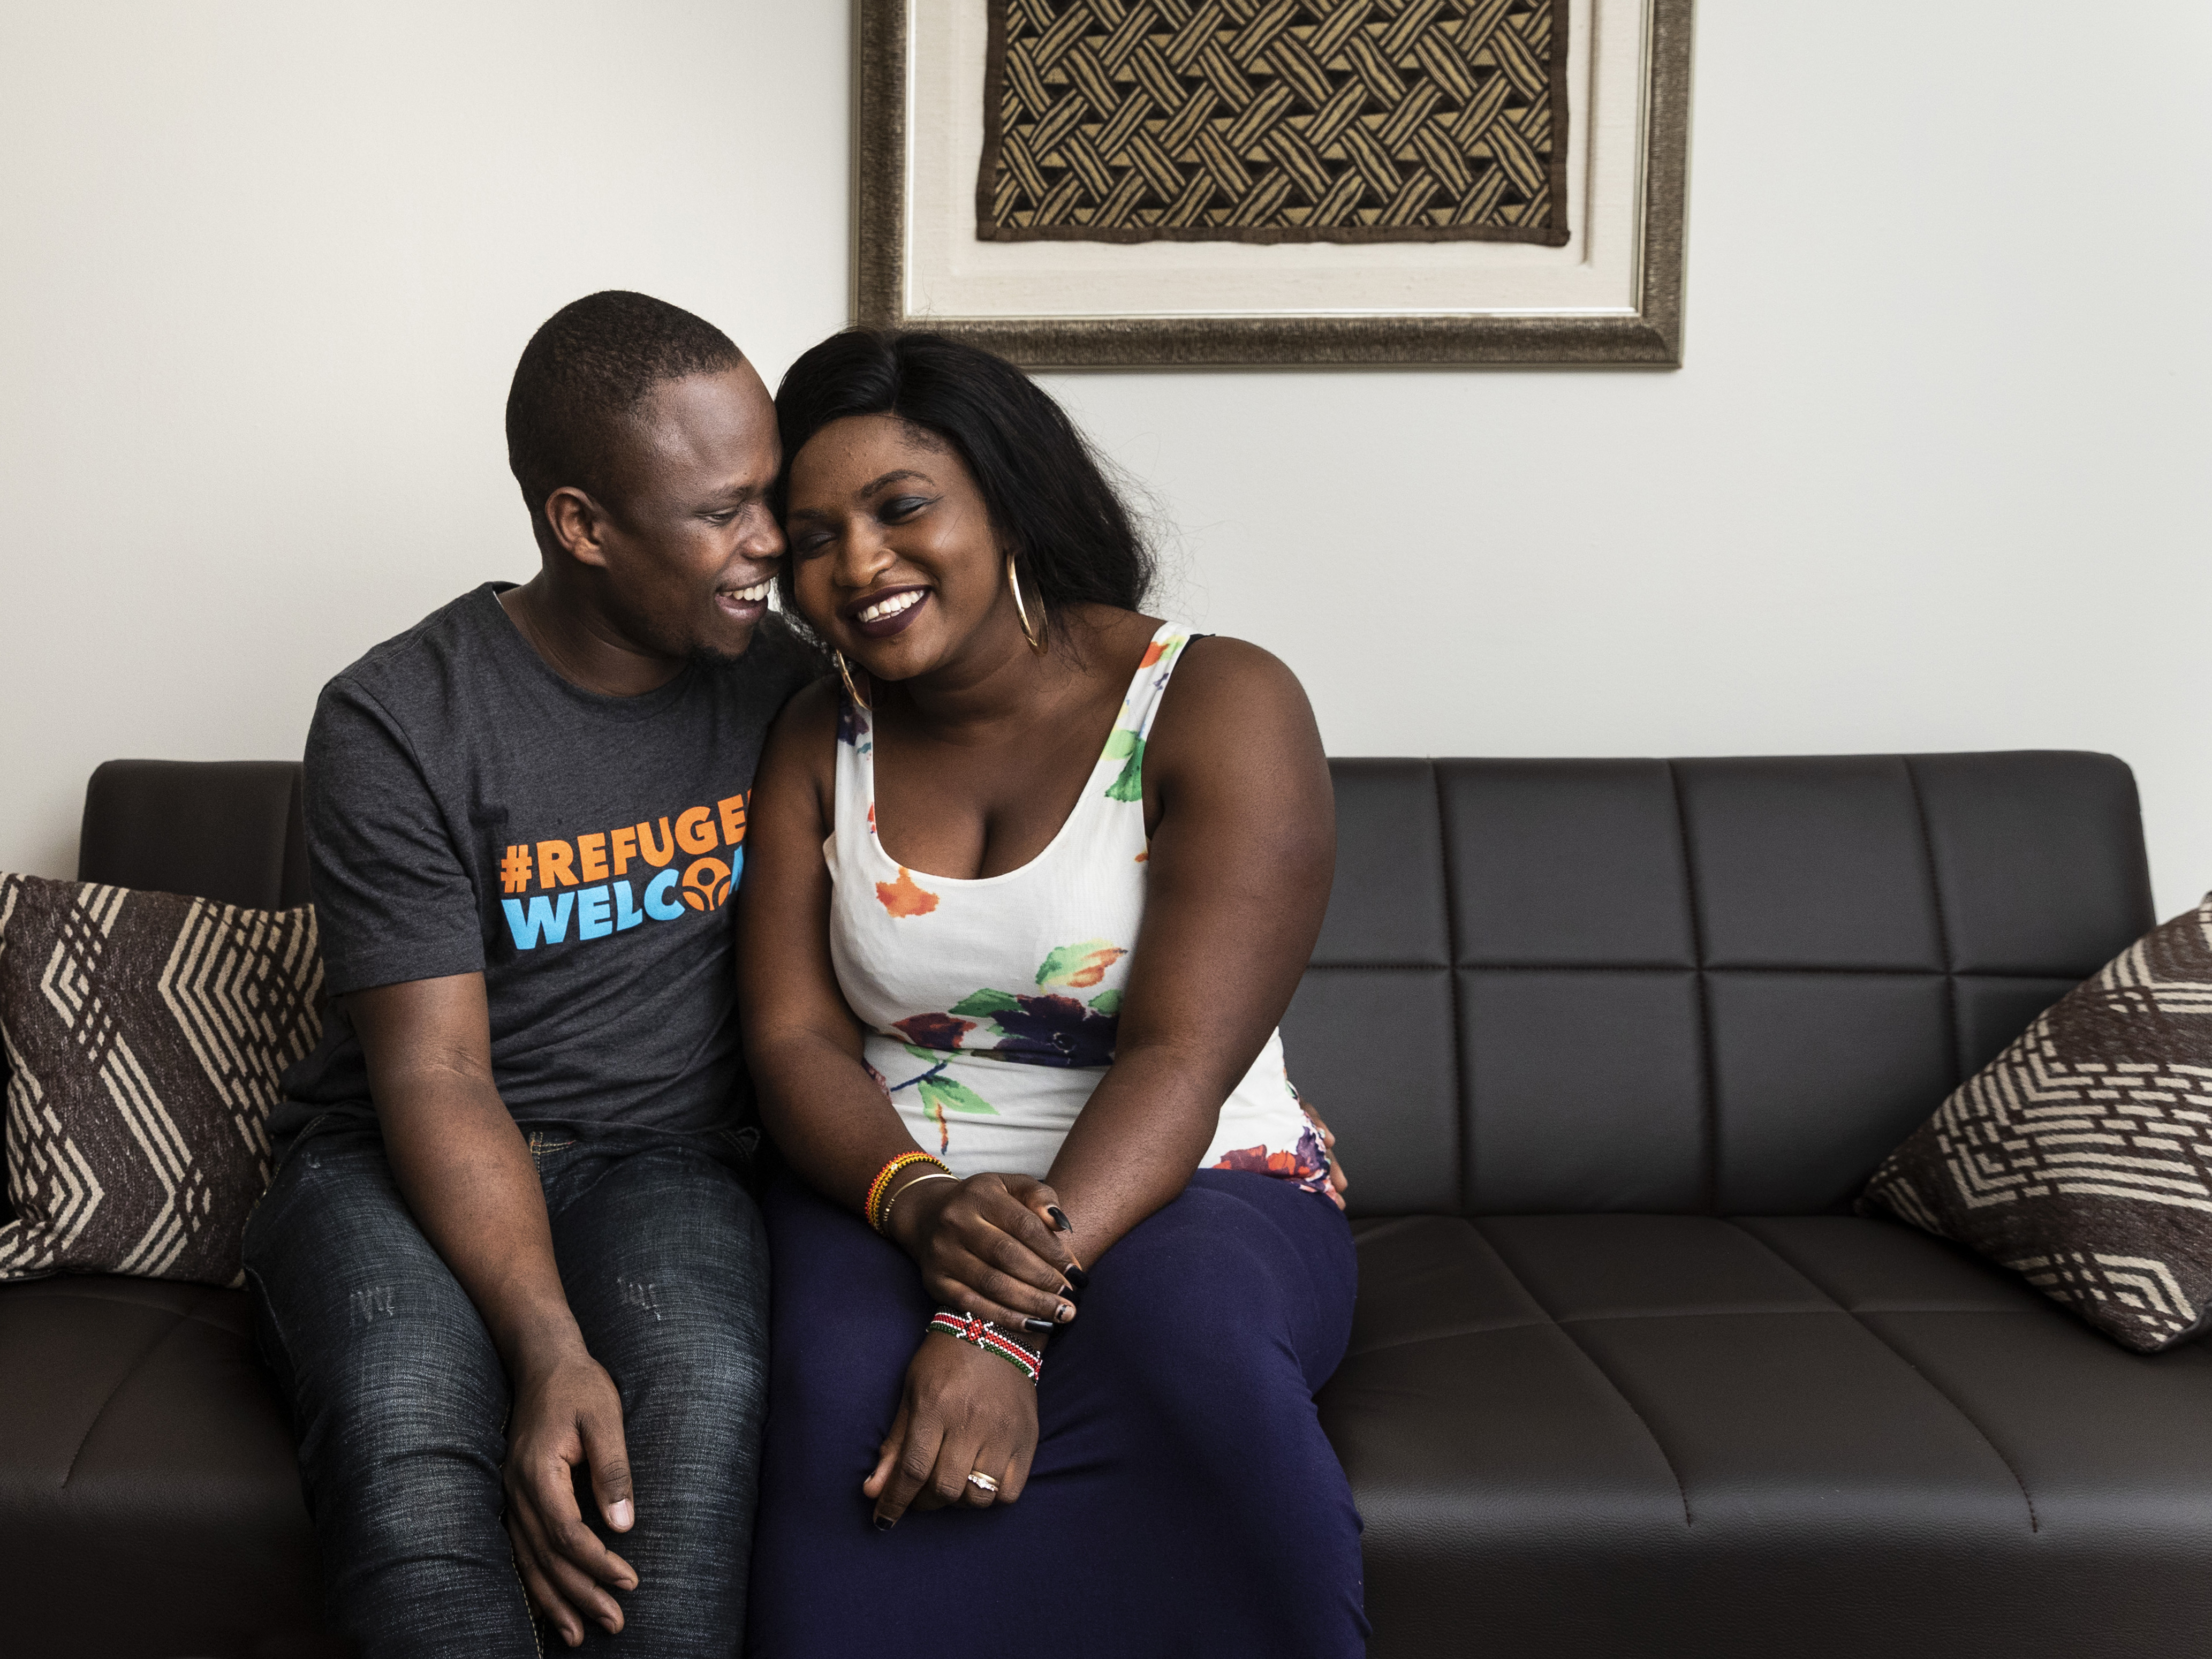 Celestine Mugisha and his wife, Winniefred Akello, embrace on the couch in their apartment in Rogers Park on the North Side, Jan. 30, 2020. Mugisha and Akello were married in Uganda in September 2016 and, days later, Mugisha moved to Chicago as part of the United States’ refugee resettlement program. More than three years later, Akello was also resettled through the program and the couple was reunited at O’Hare International Airport on Jan. 22, 2020.